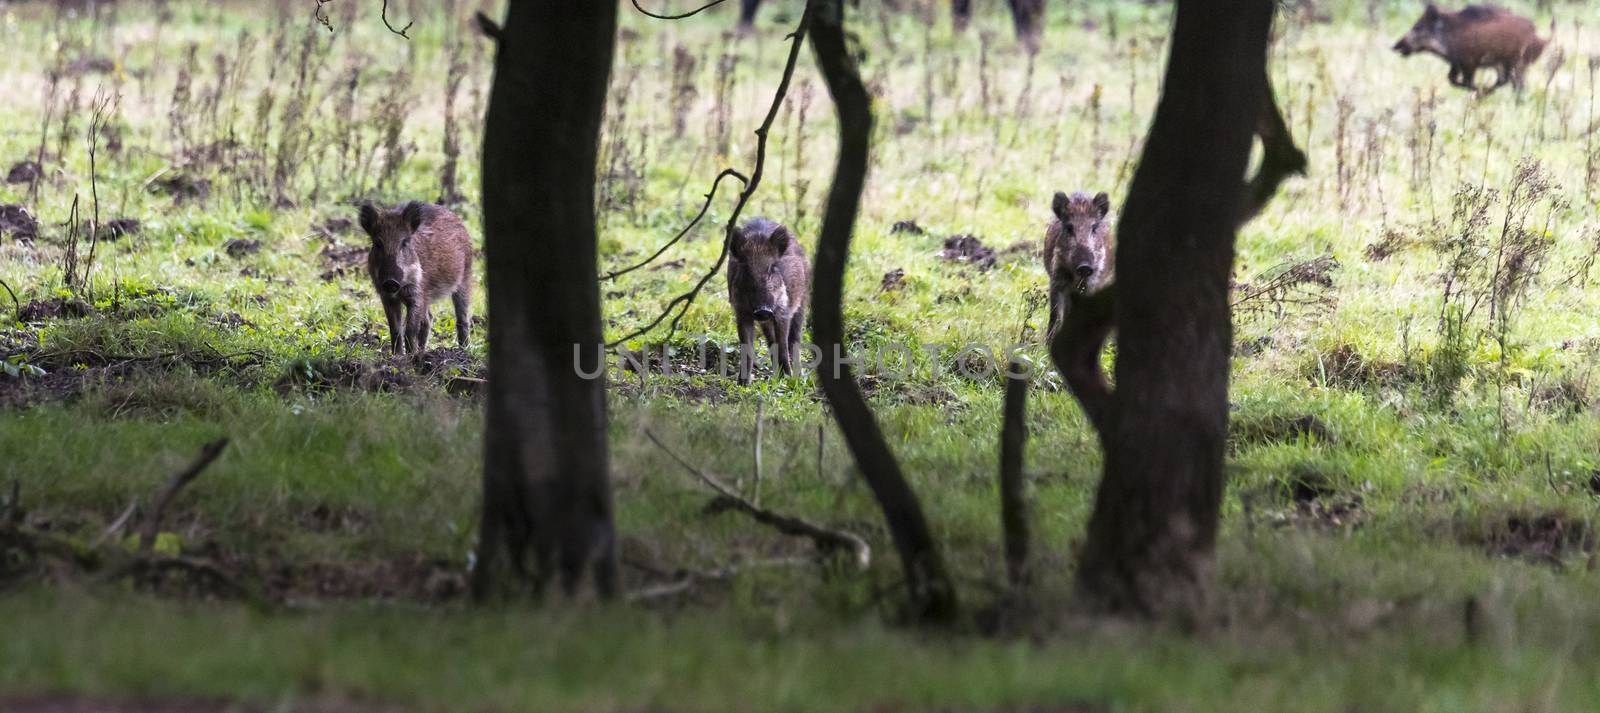 three wildboar animal in the netherlands in the forest by compuinfoto